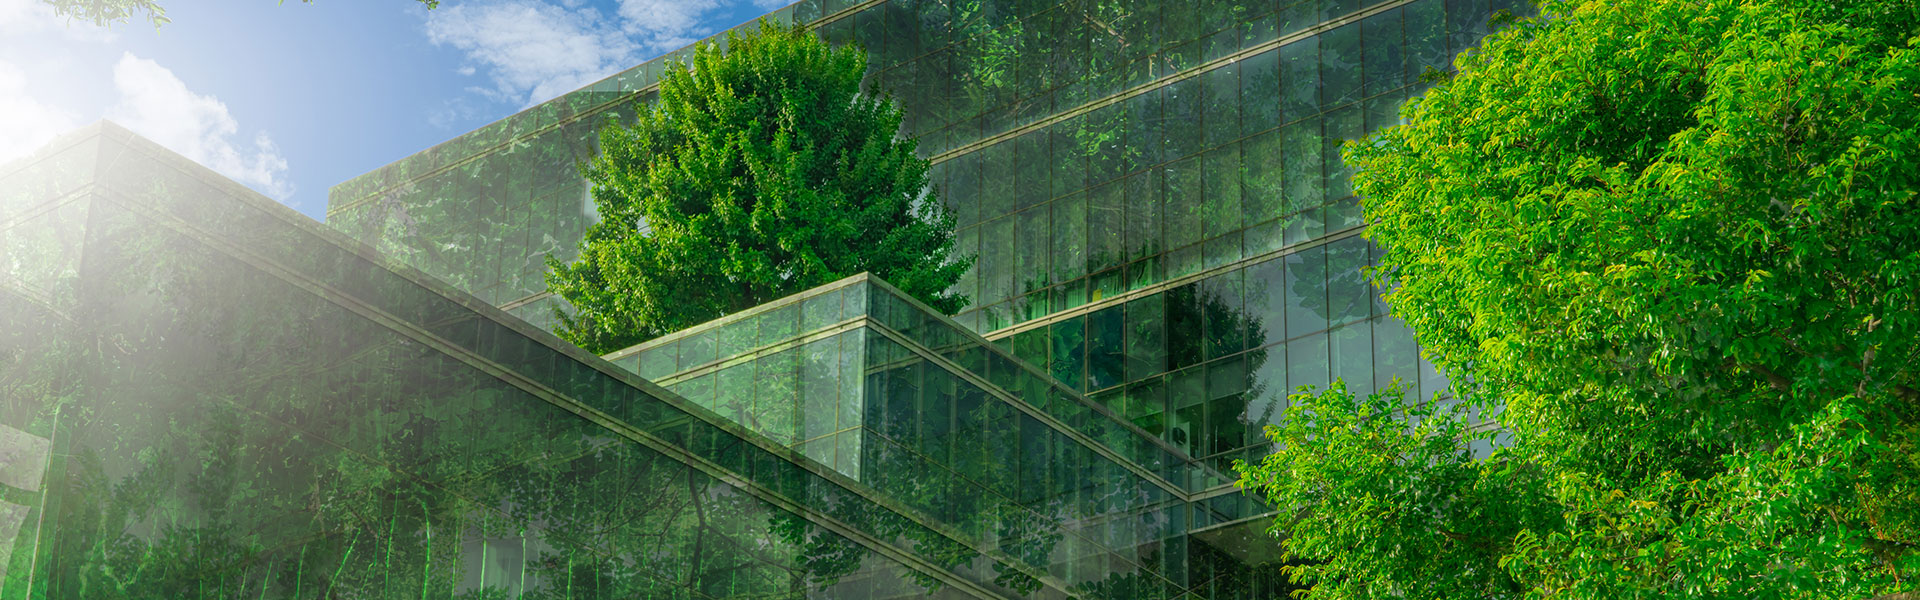 Glass Building surrounding by trees, showing reflection of trees in the glass. Procurement solution helps NHS achieve Net Zero.